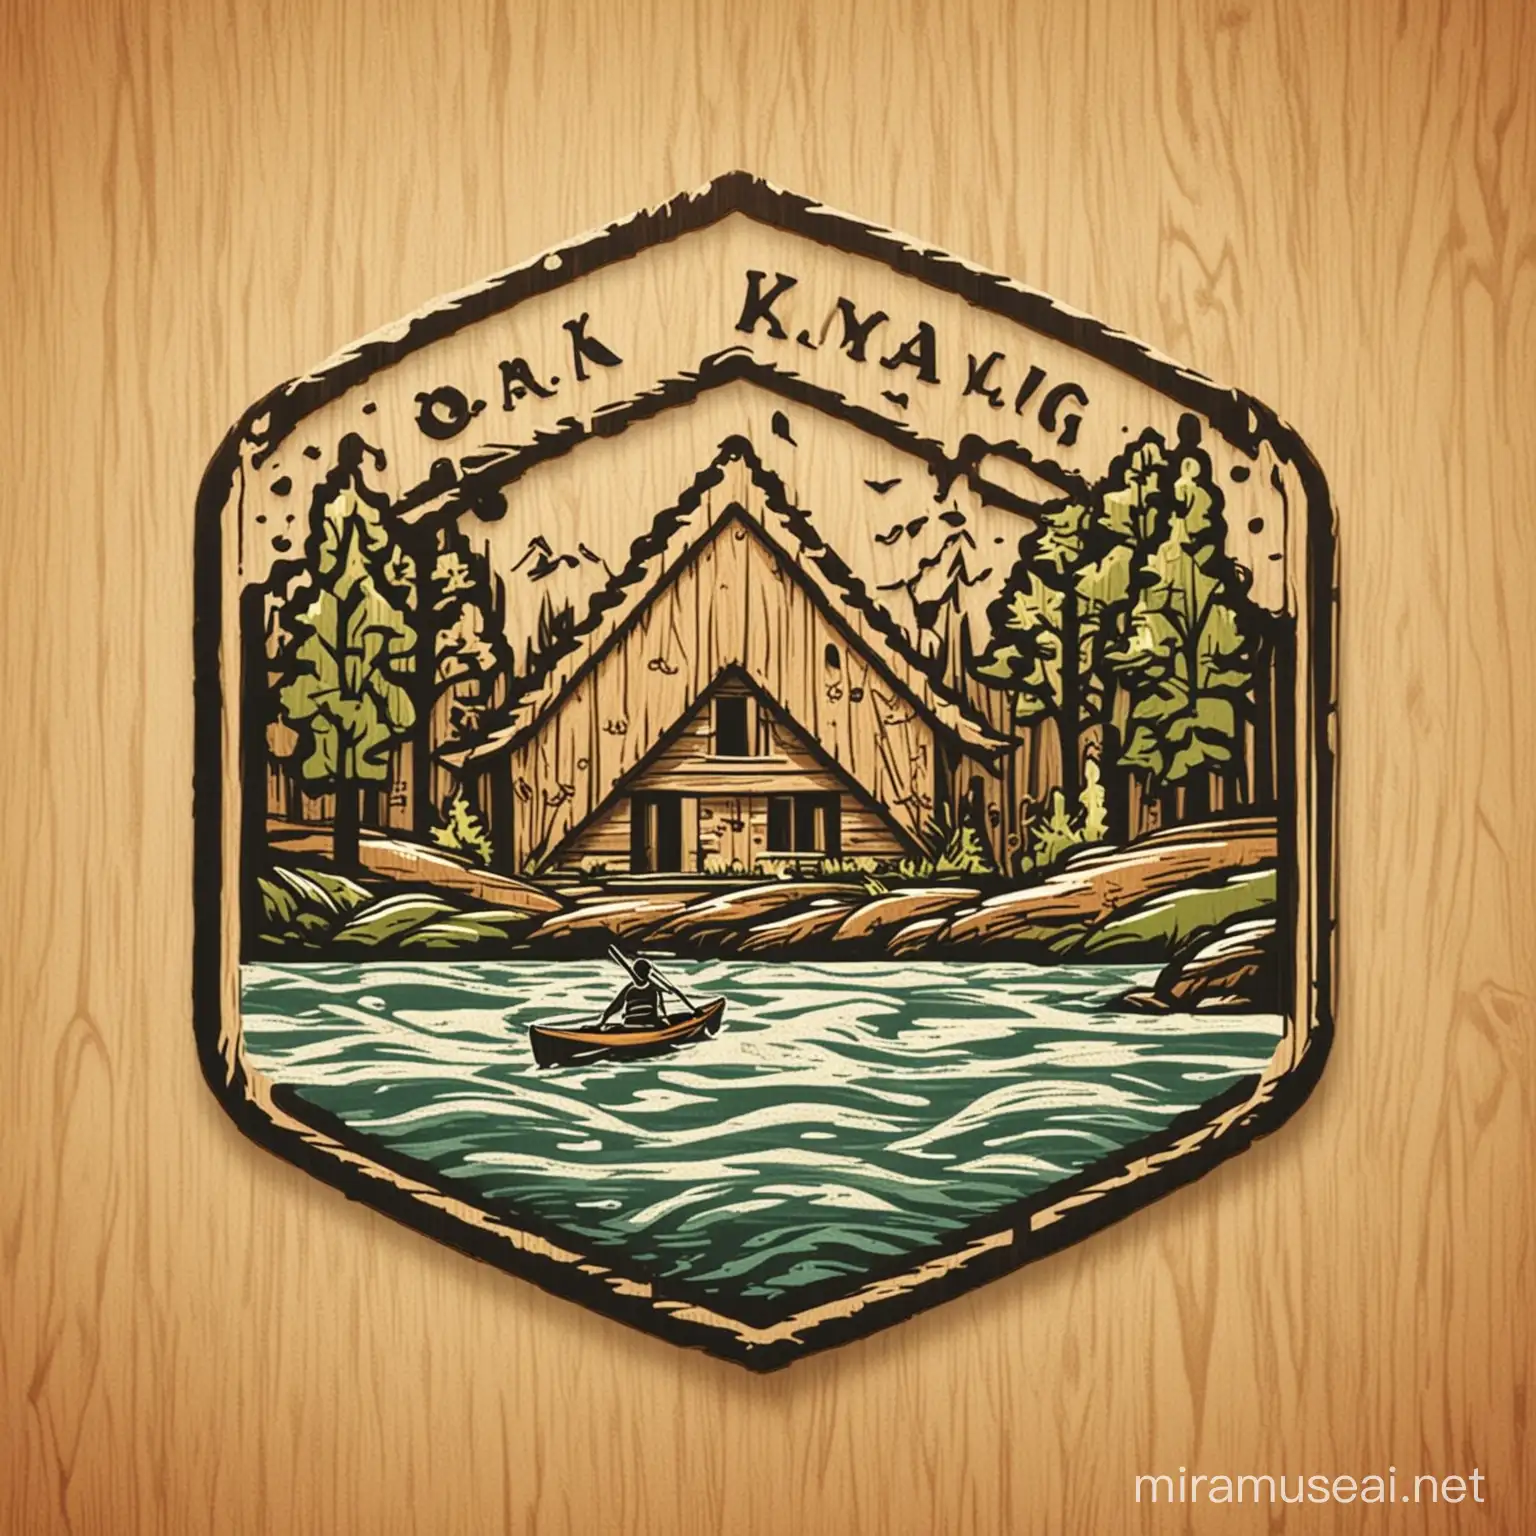 logo, icon river family kayaking, river ornament in the form of a rectangle, oak forest, hut house far away